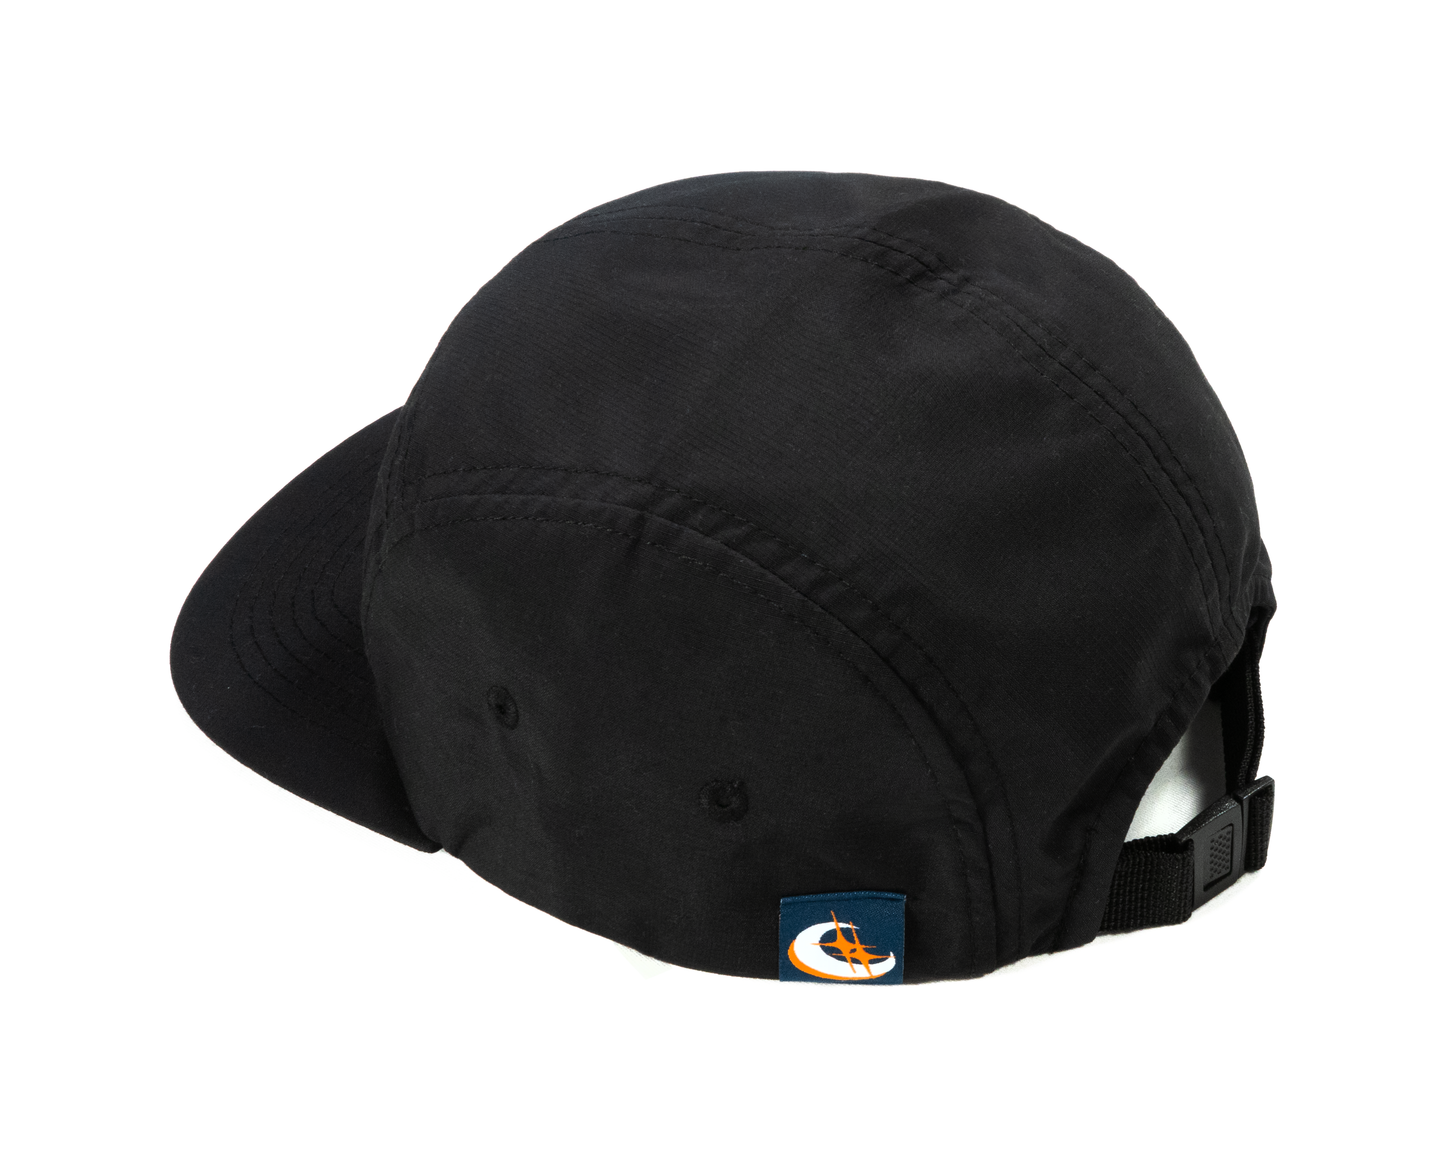 Moon Smile Embroidered Five Panel Cap  - Black